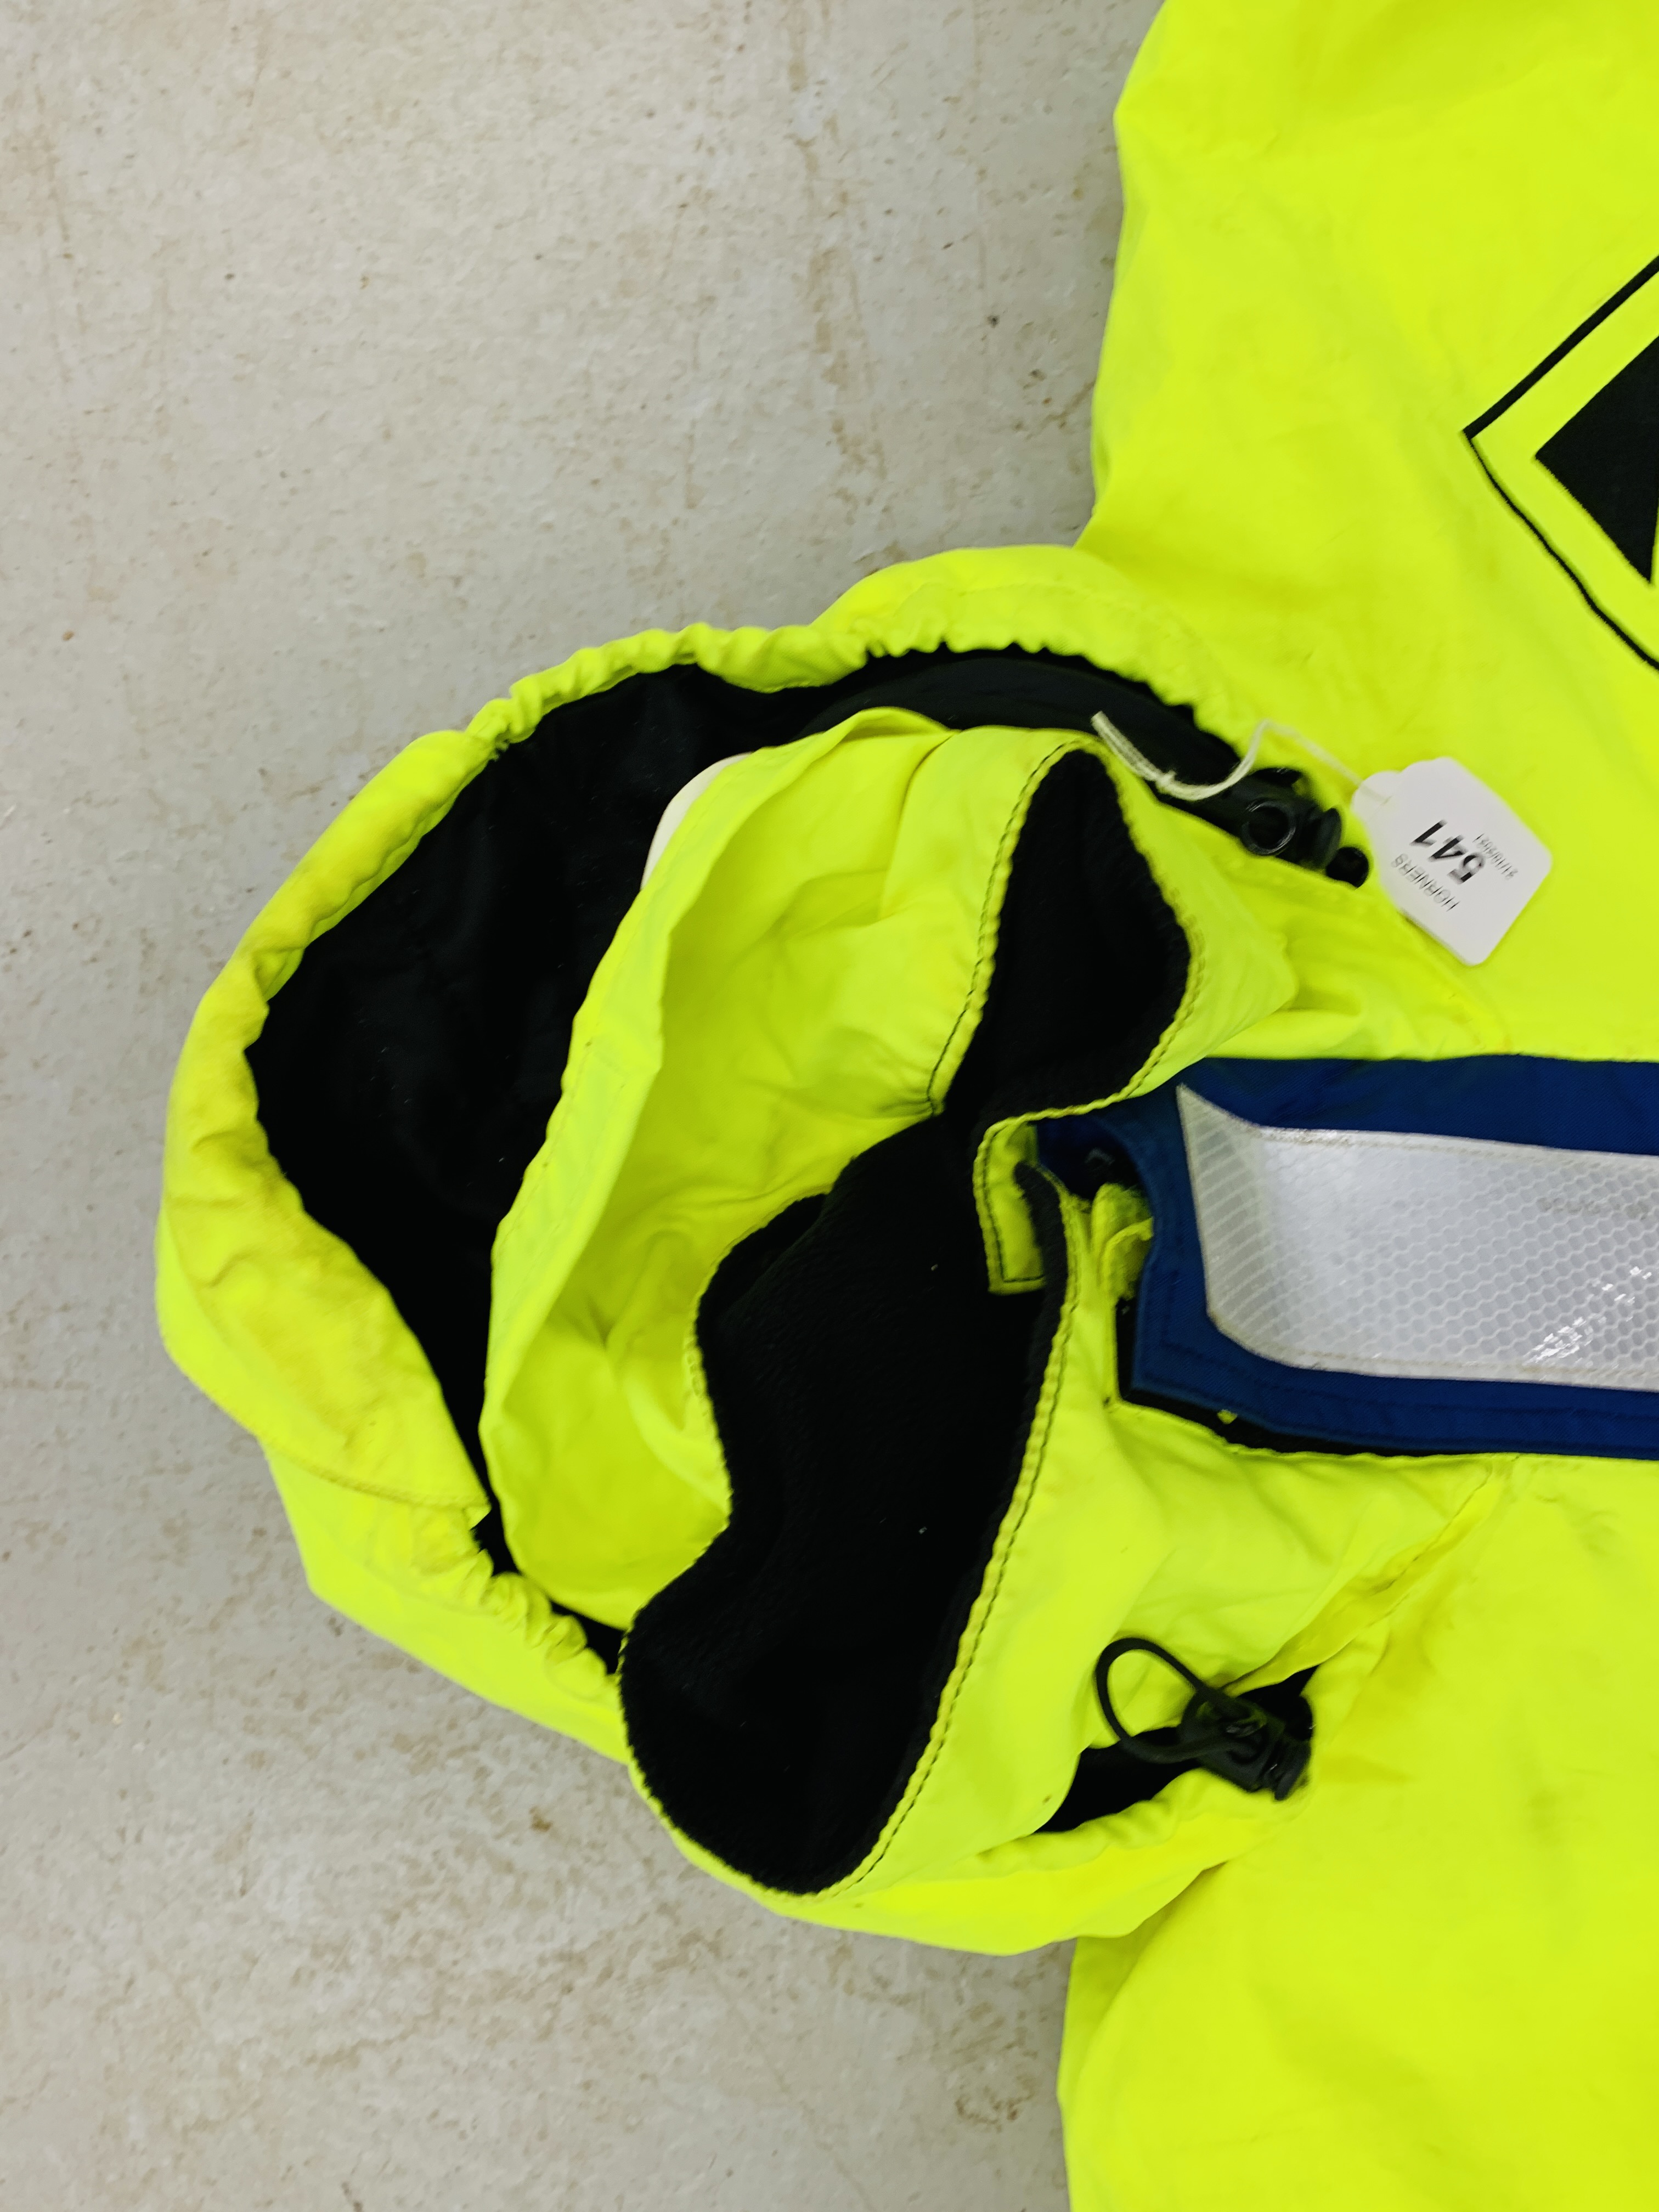 A FLADEN RESCUE SYSTEM FULL BODY SUIT SIZE XXL (YELLOW AND BLUE) - Image 5 of 5